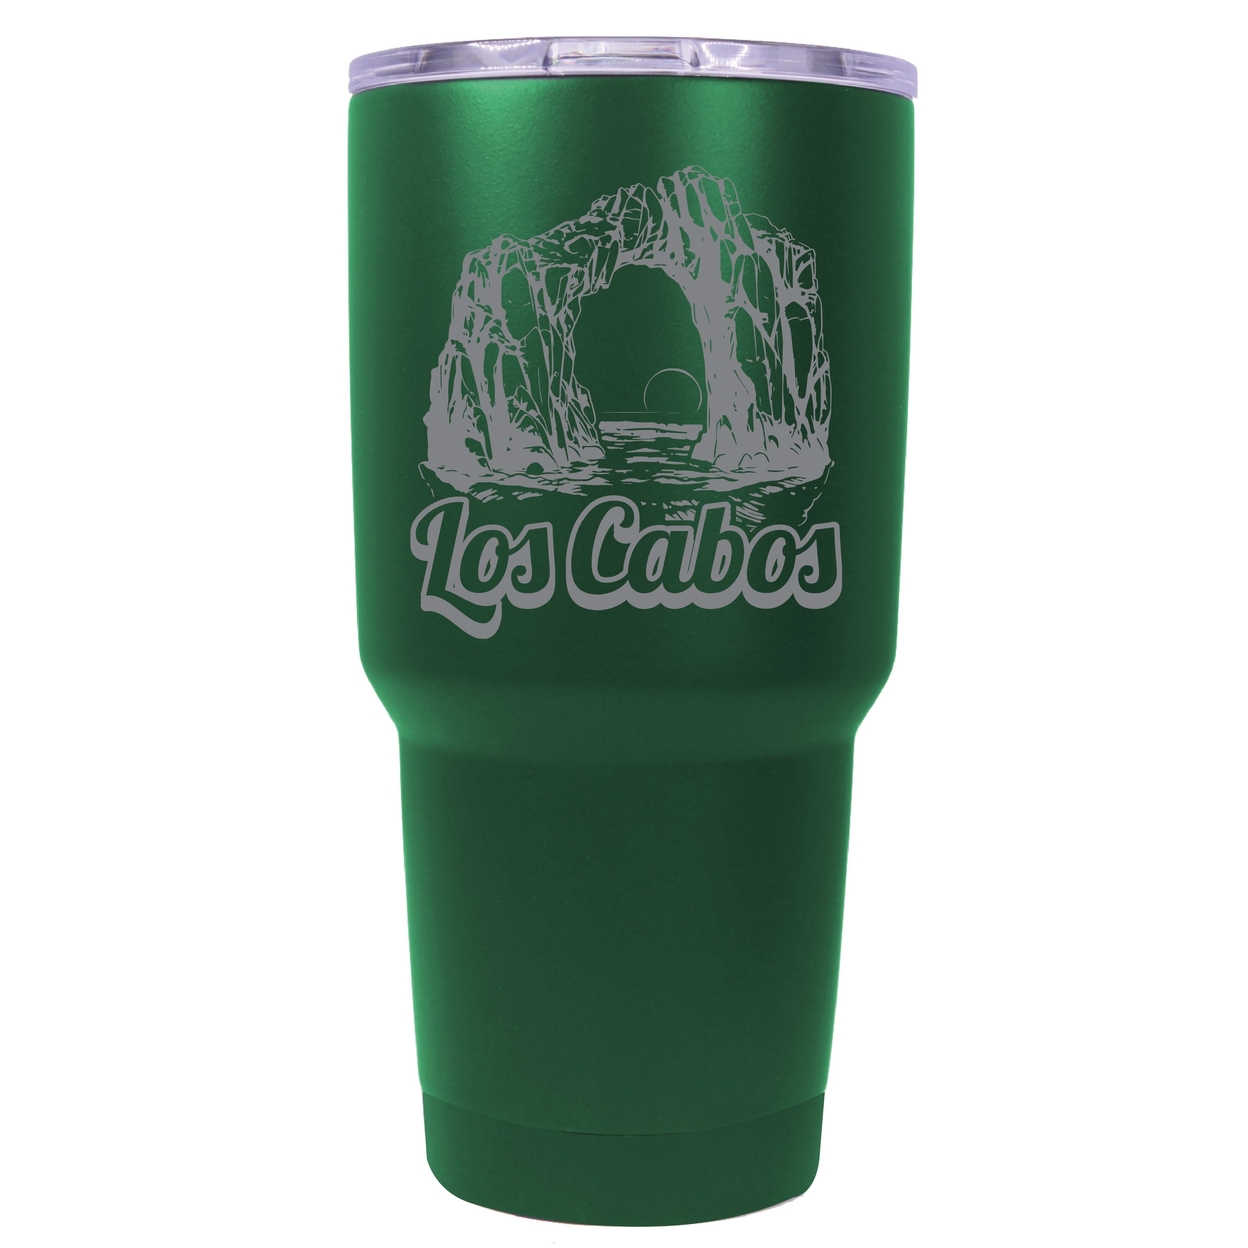 Los Cabos Mexico Souvenir 24 Oz Engraved Insulated Stainless Steel Tumbler - Green,,4-Pack